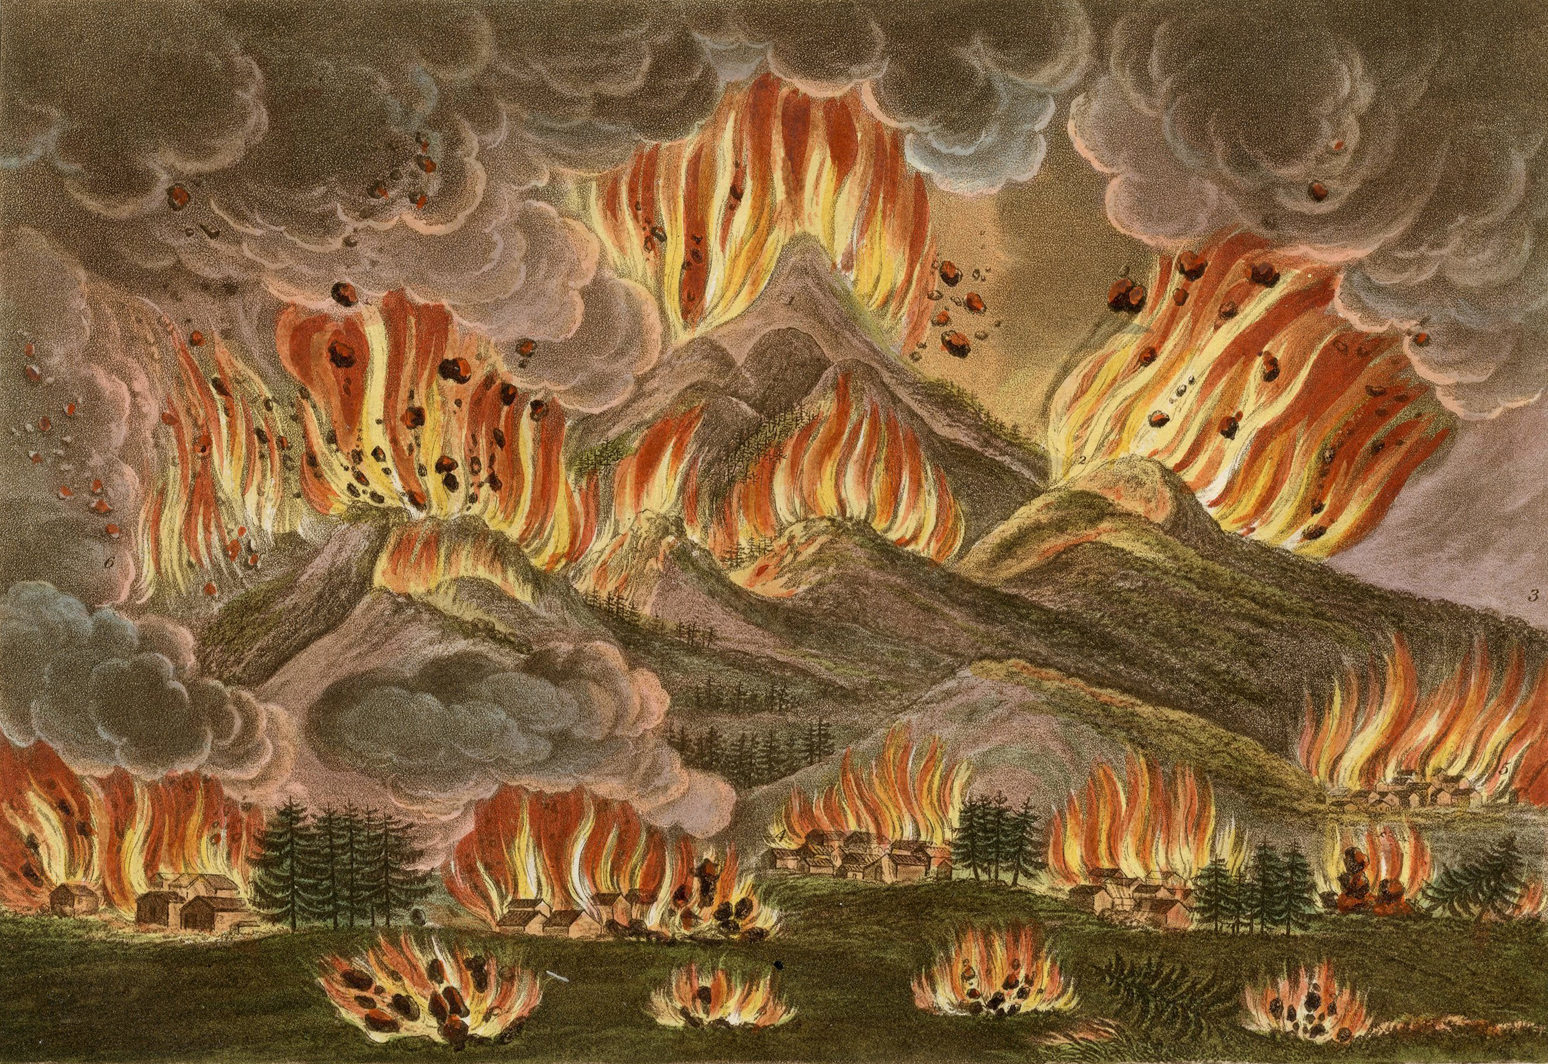 “Earthquake and Eruption of the Mountain of Asayama” in Japan in 1783, from an account by Isaac Titsingh, 1822